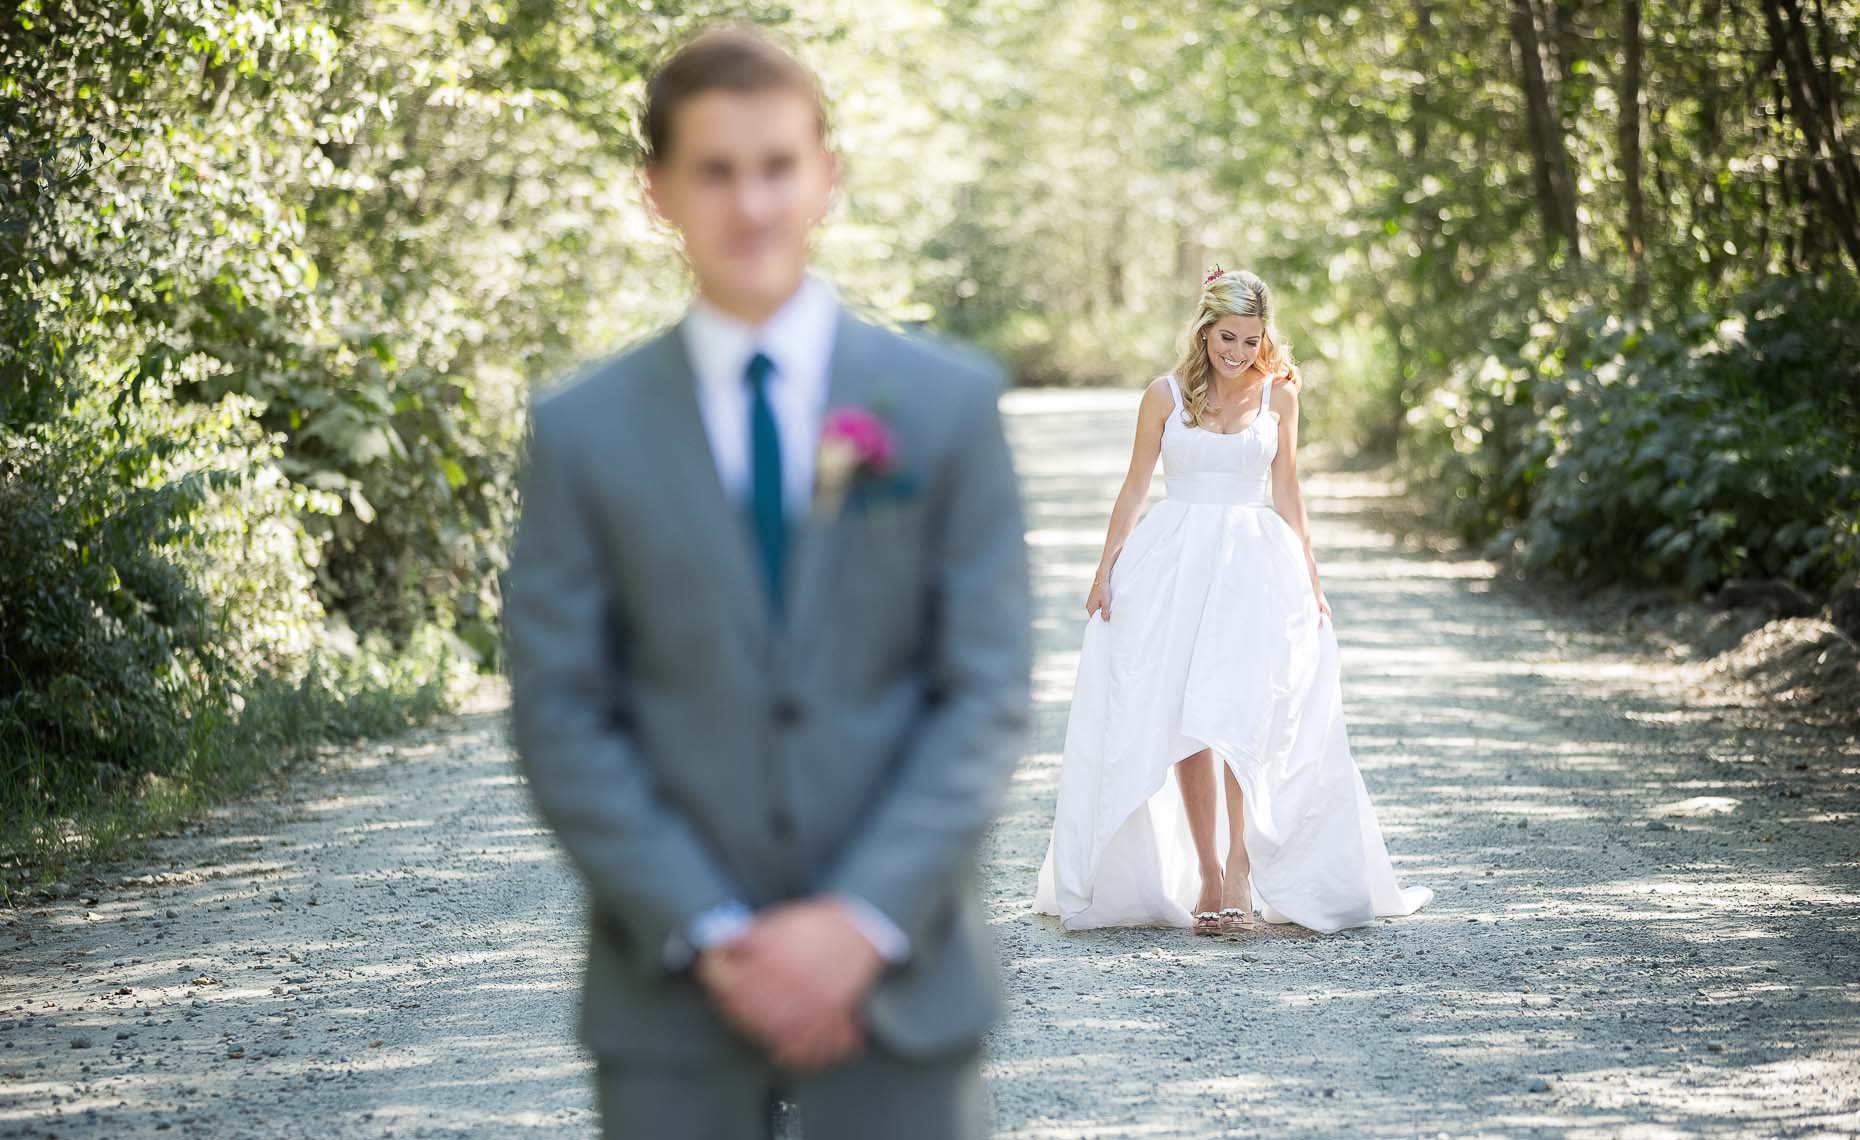 First look in vintage style wedding in whistler.